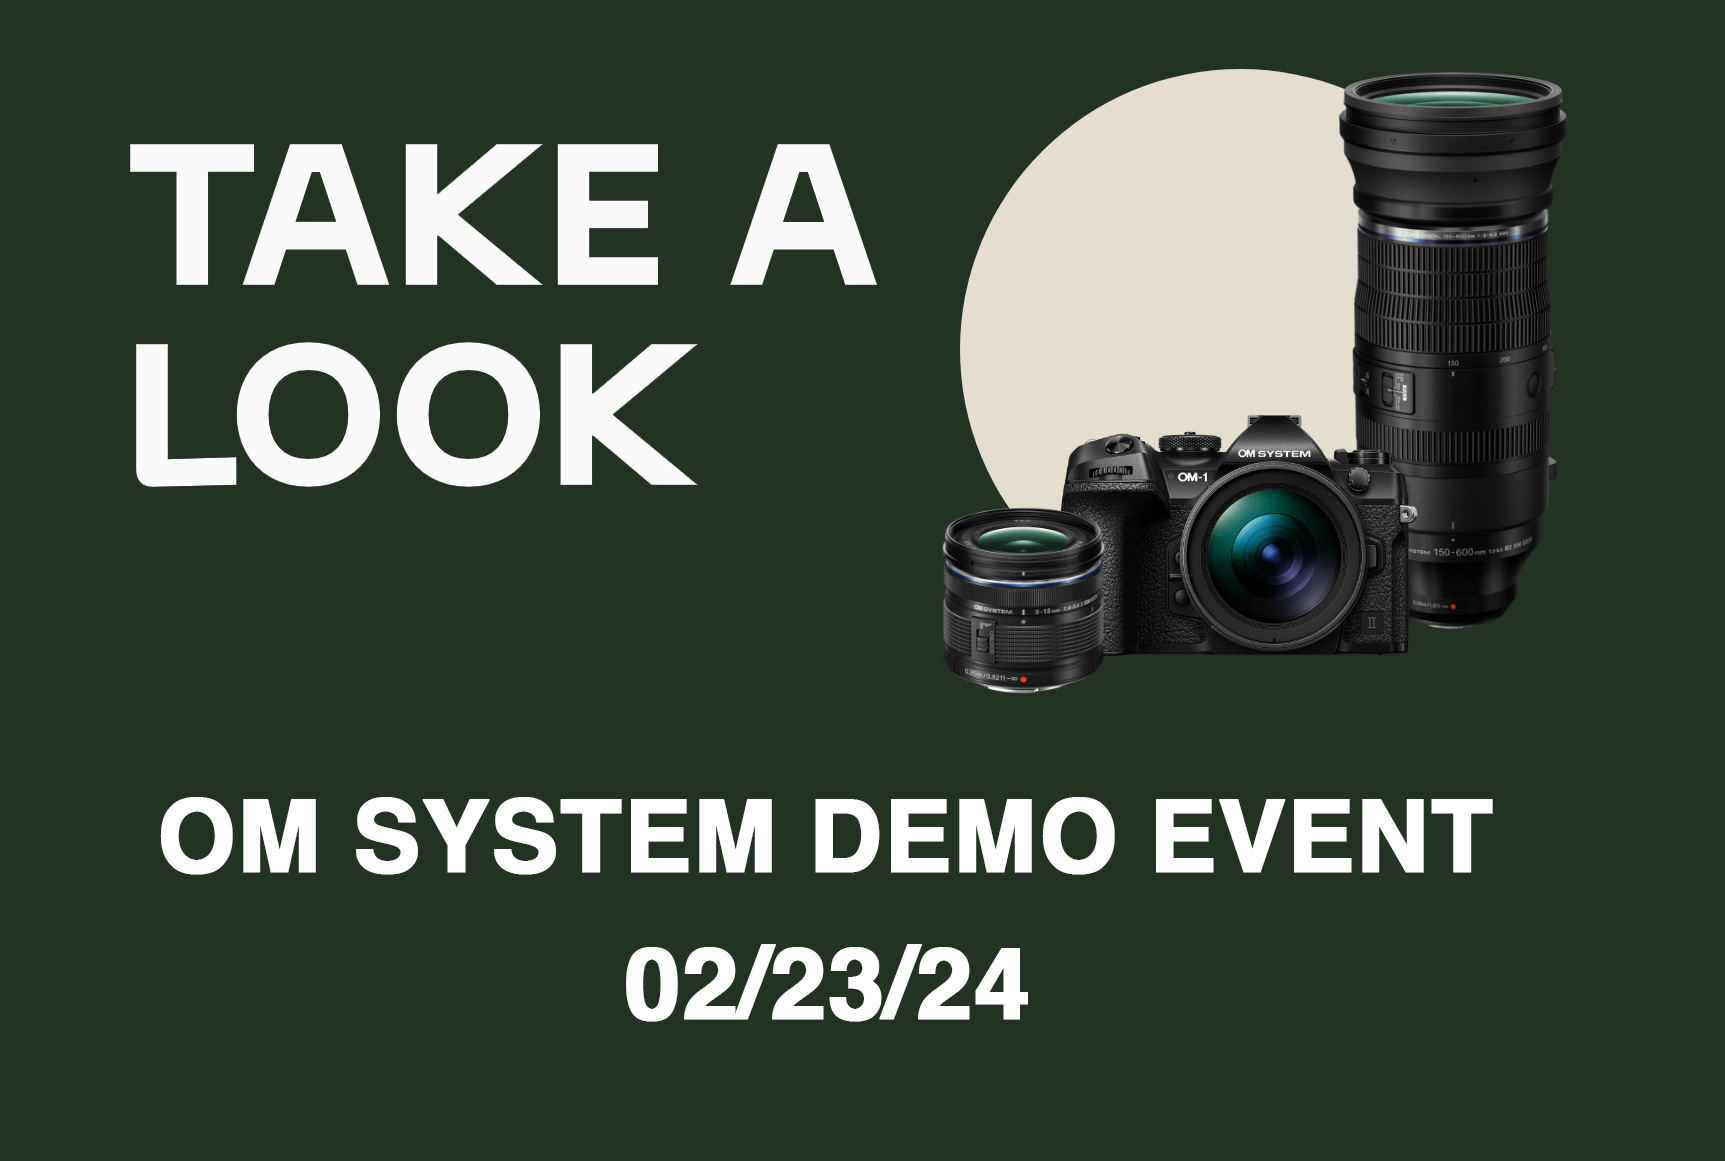 OM System First Look Event: OM-1 Mark II, M.Zuiko 150-600mm and 9-18mm Lenses